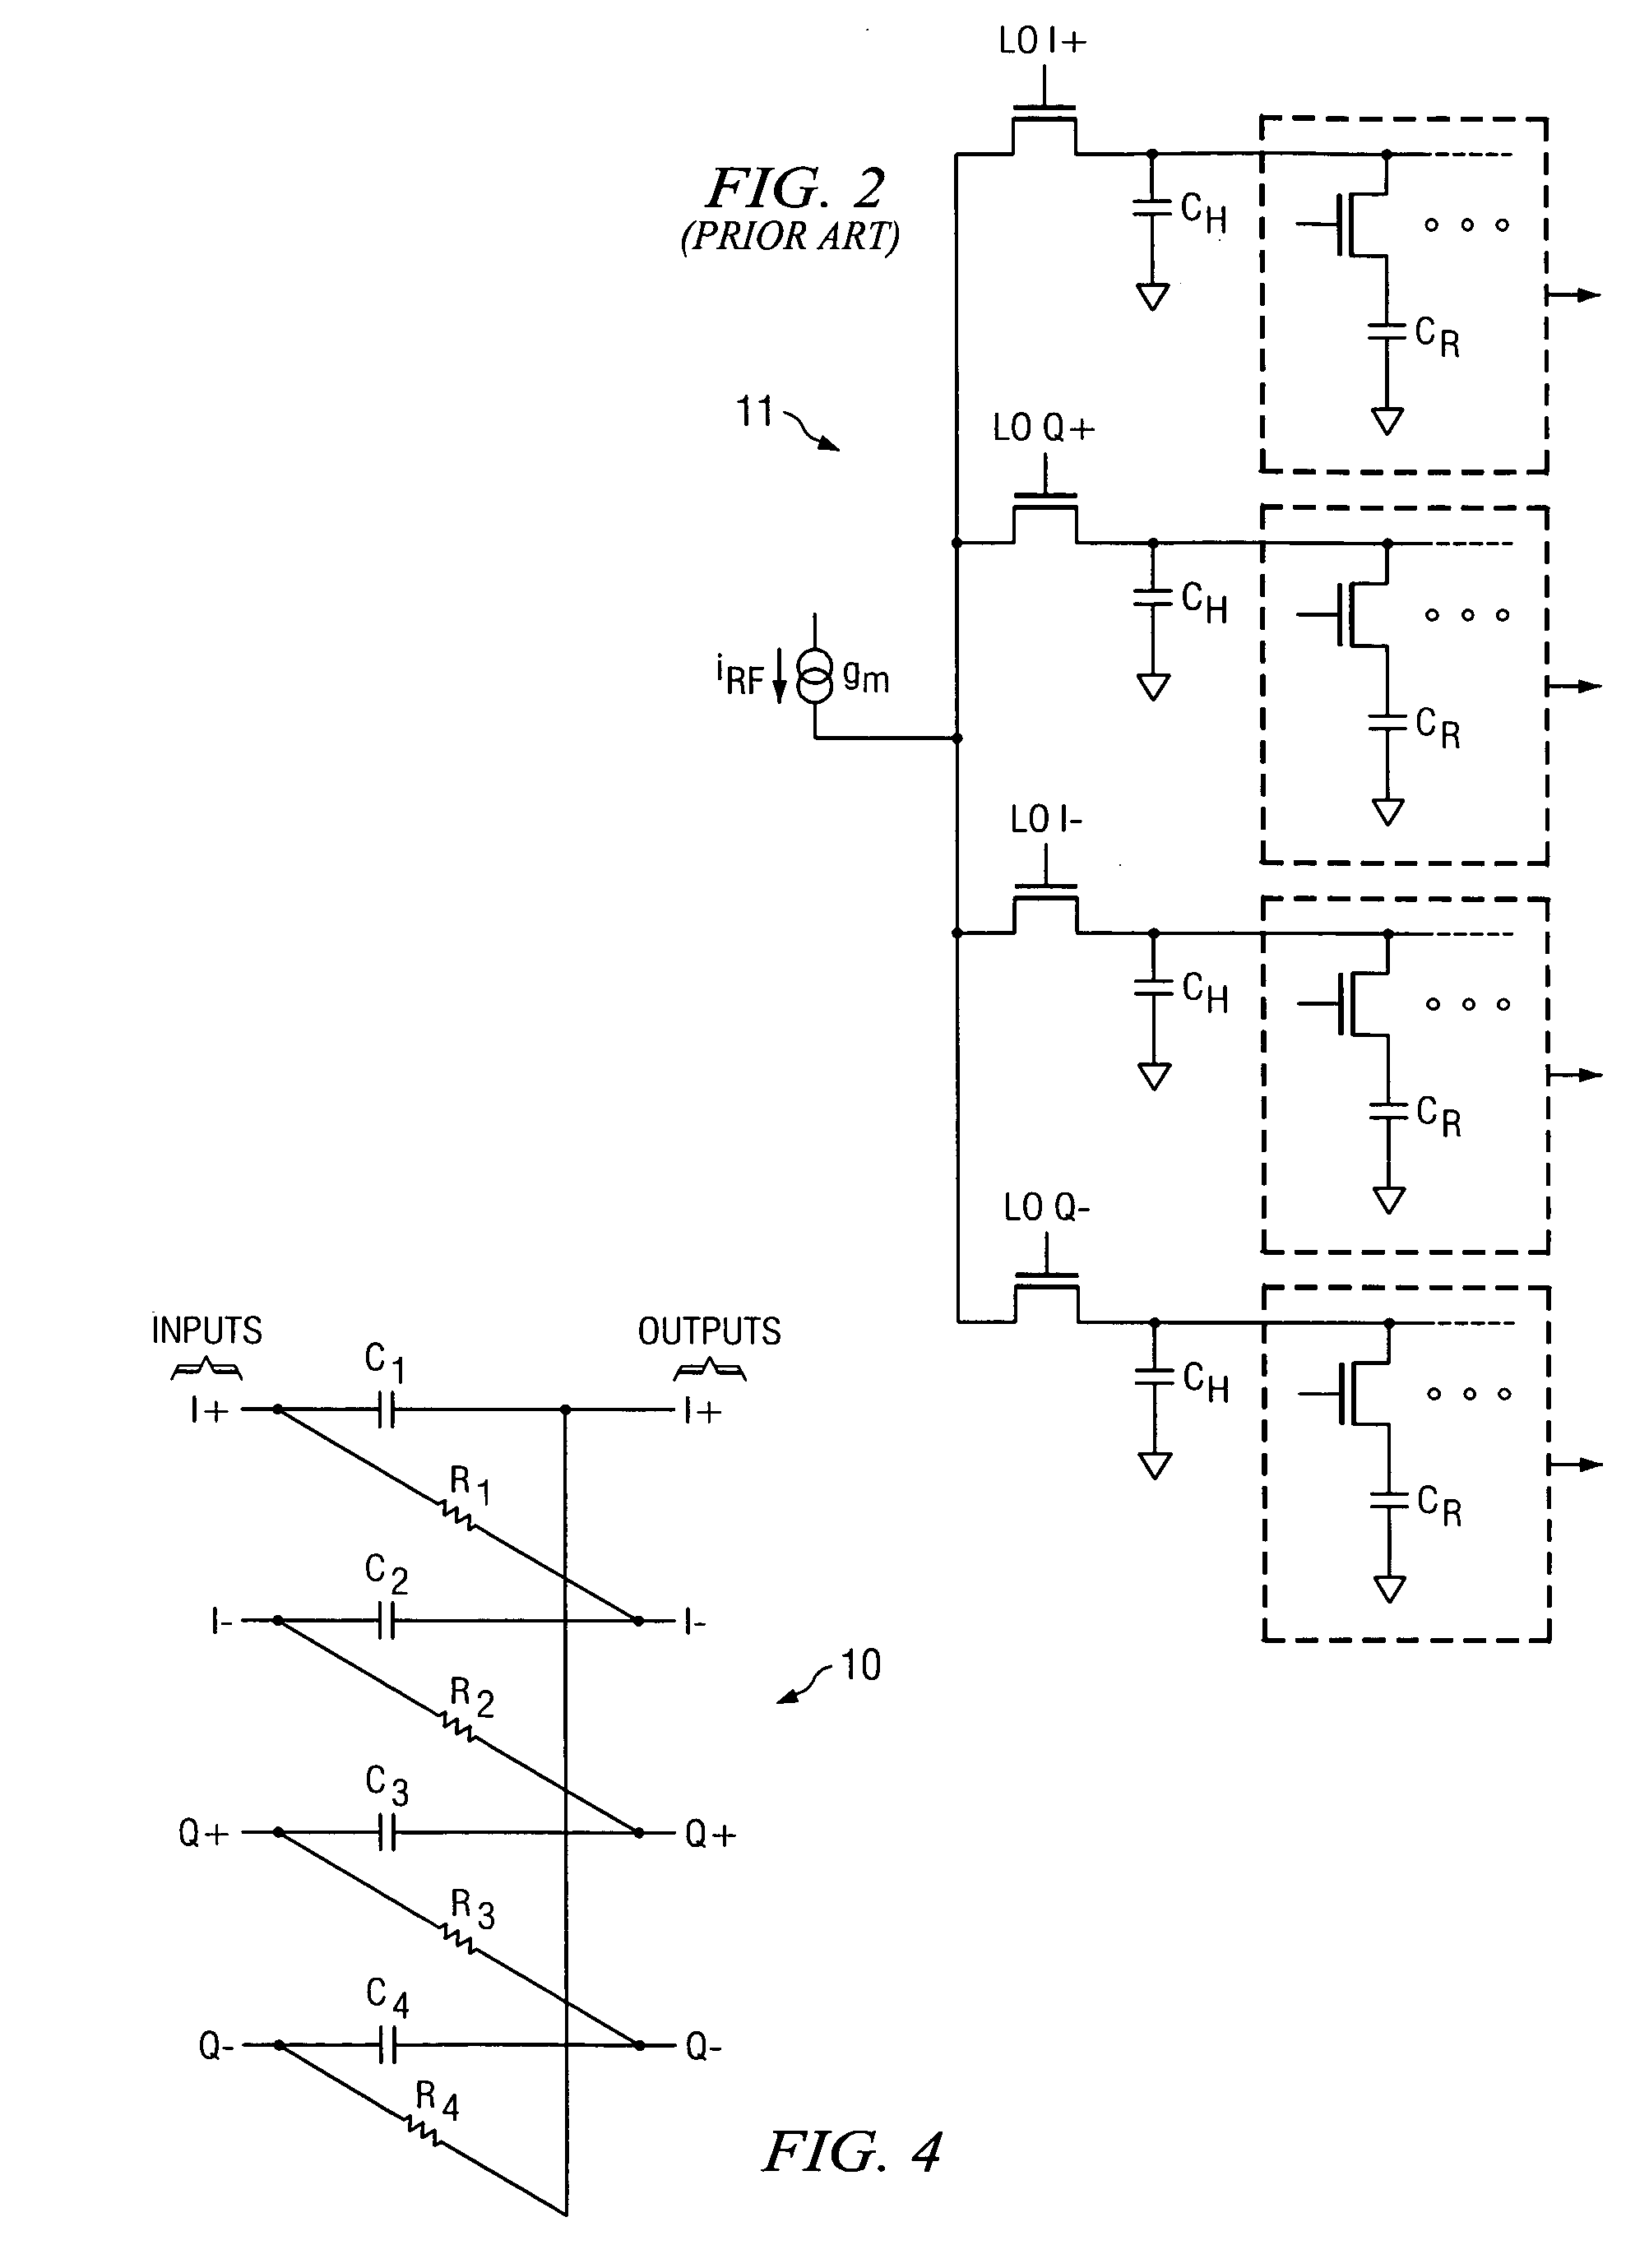 Image reject filtering in a direct sampling mixer